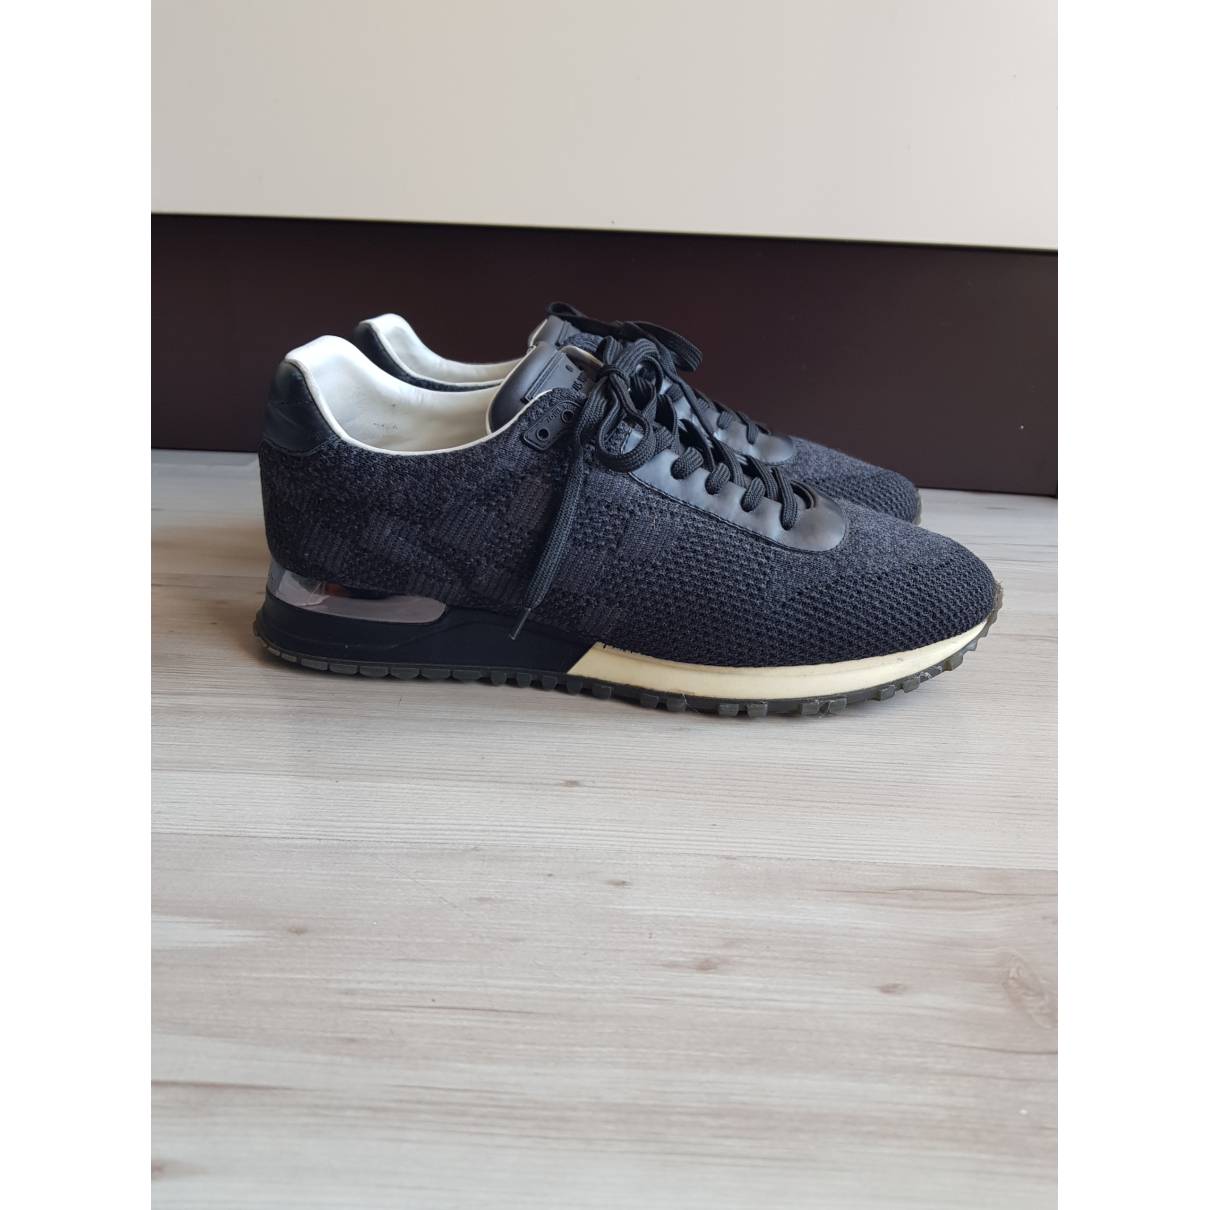 Lv runner active cloth low trainers Louis Vuitton Black size 5.5